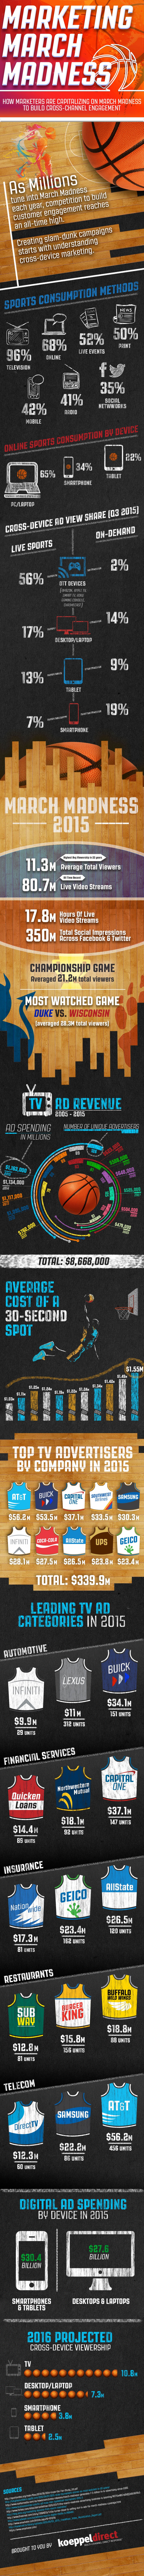 March Madness Marketing Stats & Viewership Trends